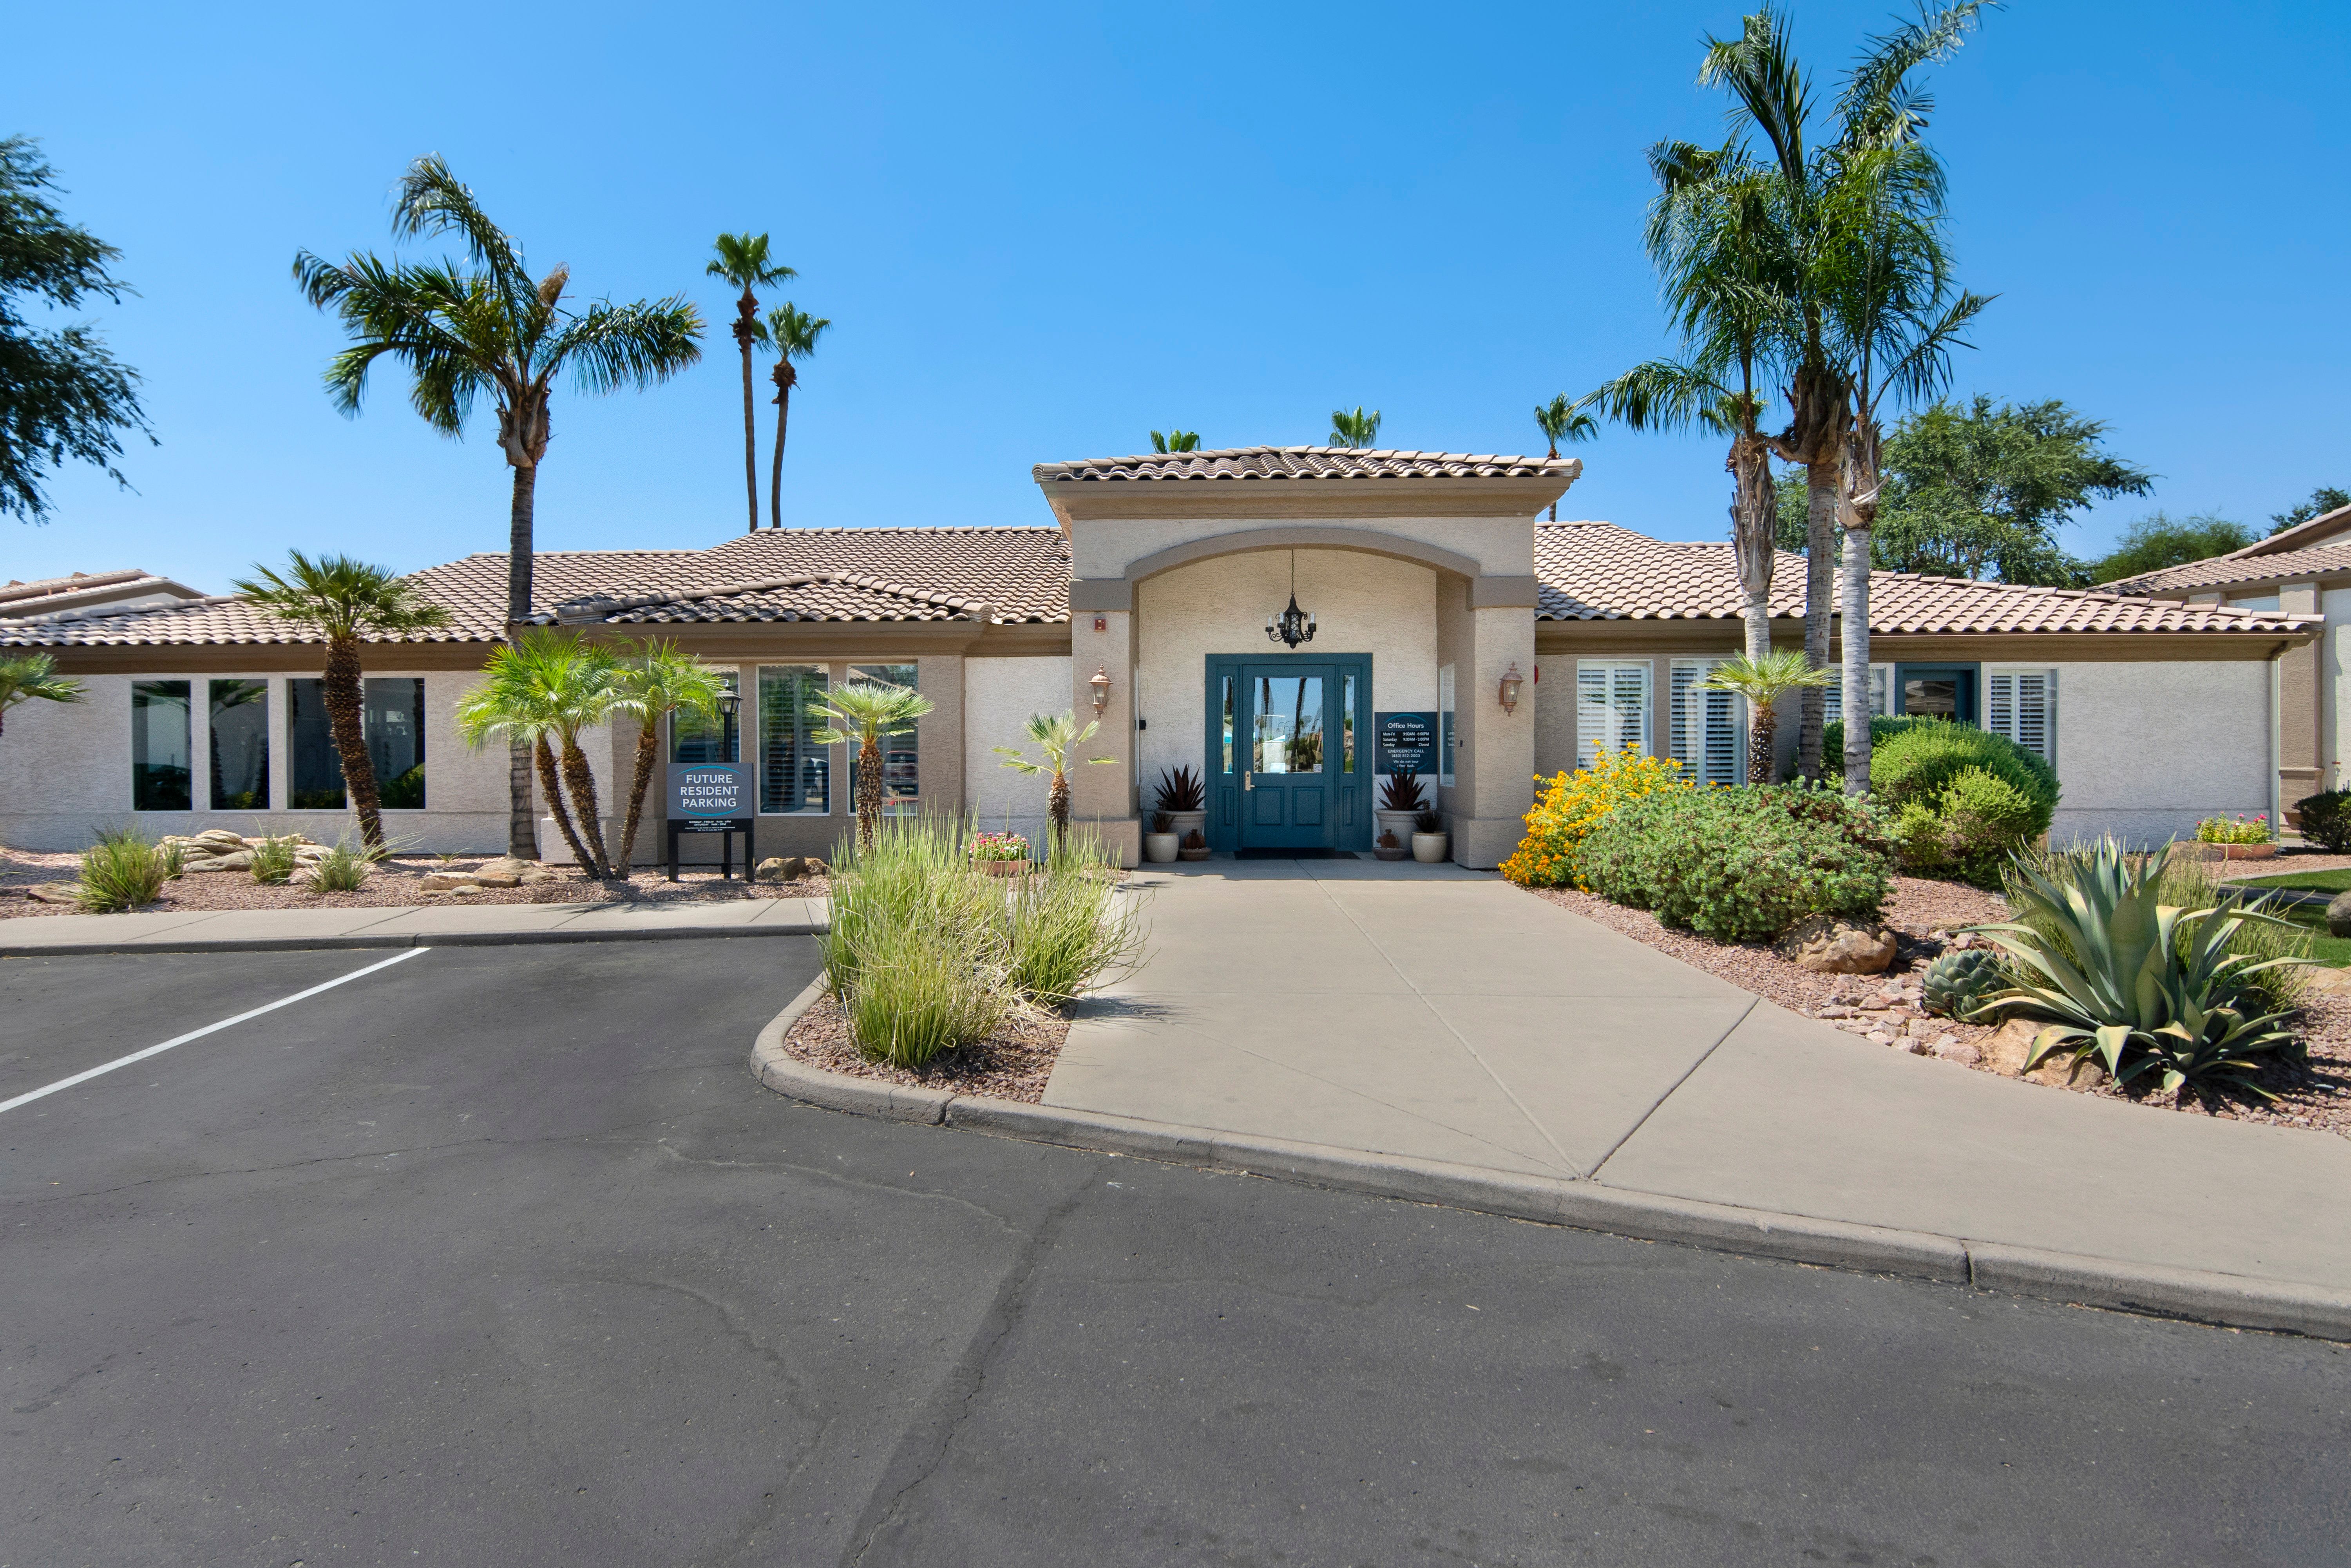 Clubhouse exterior at Ocotillo Bay Apartments in Chandler, Arizona